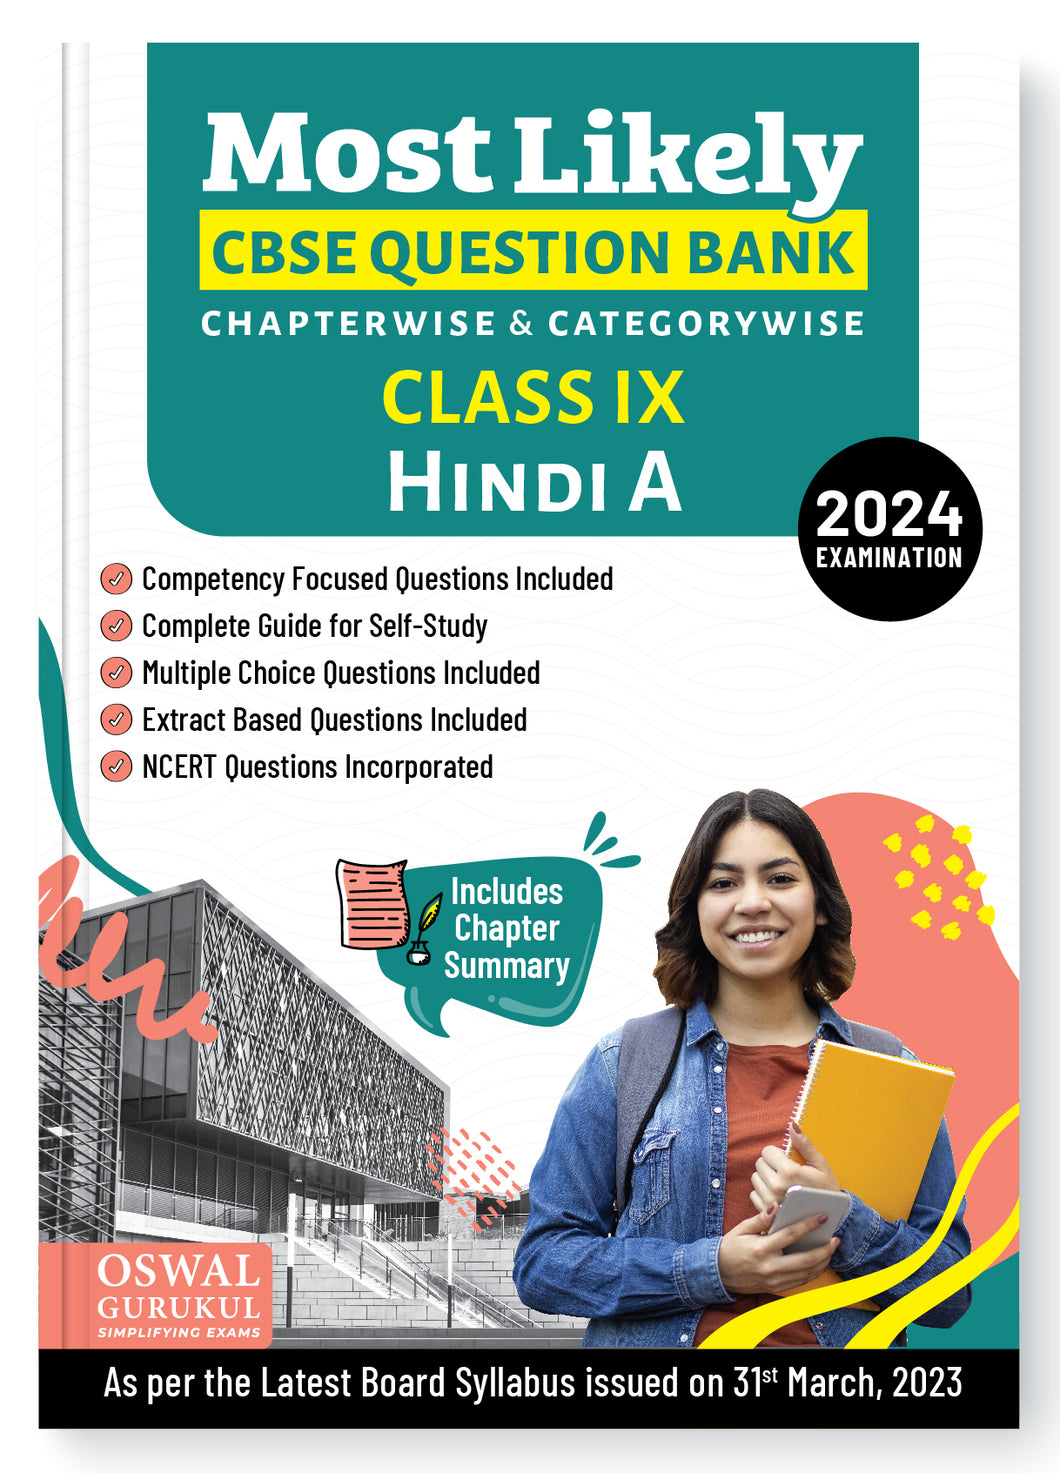 Oswal - Gurukul Hindi A Most Likely Question Bank : CBSE Class 9 for Exam 2024